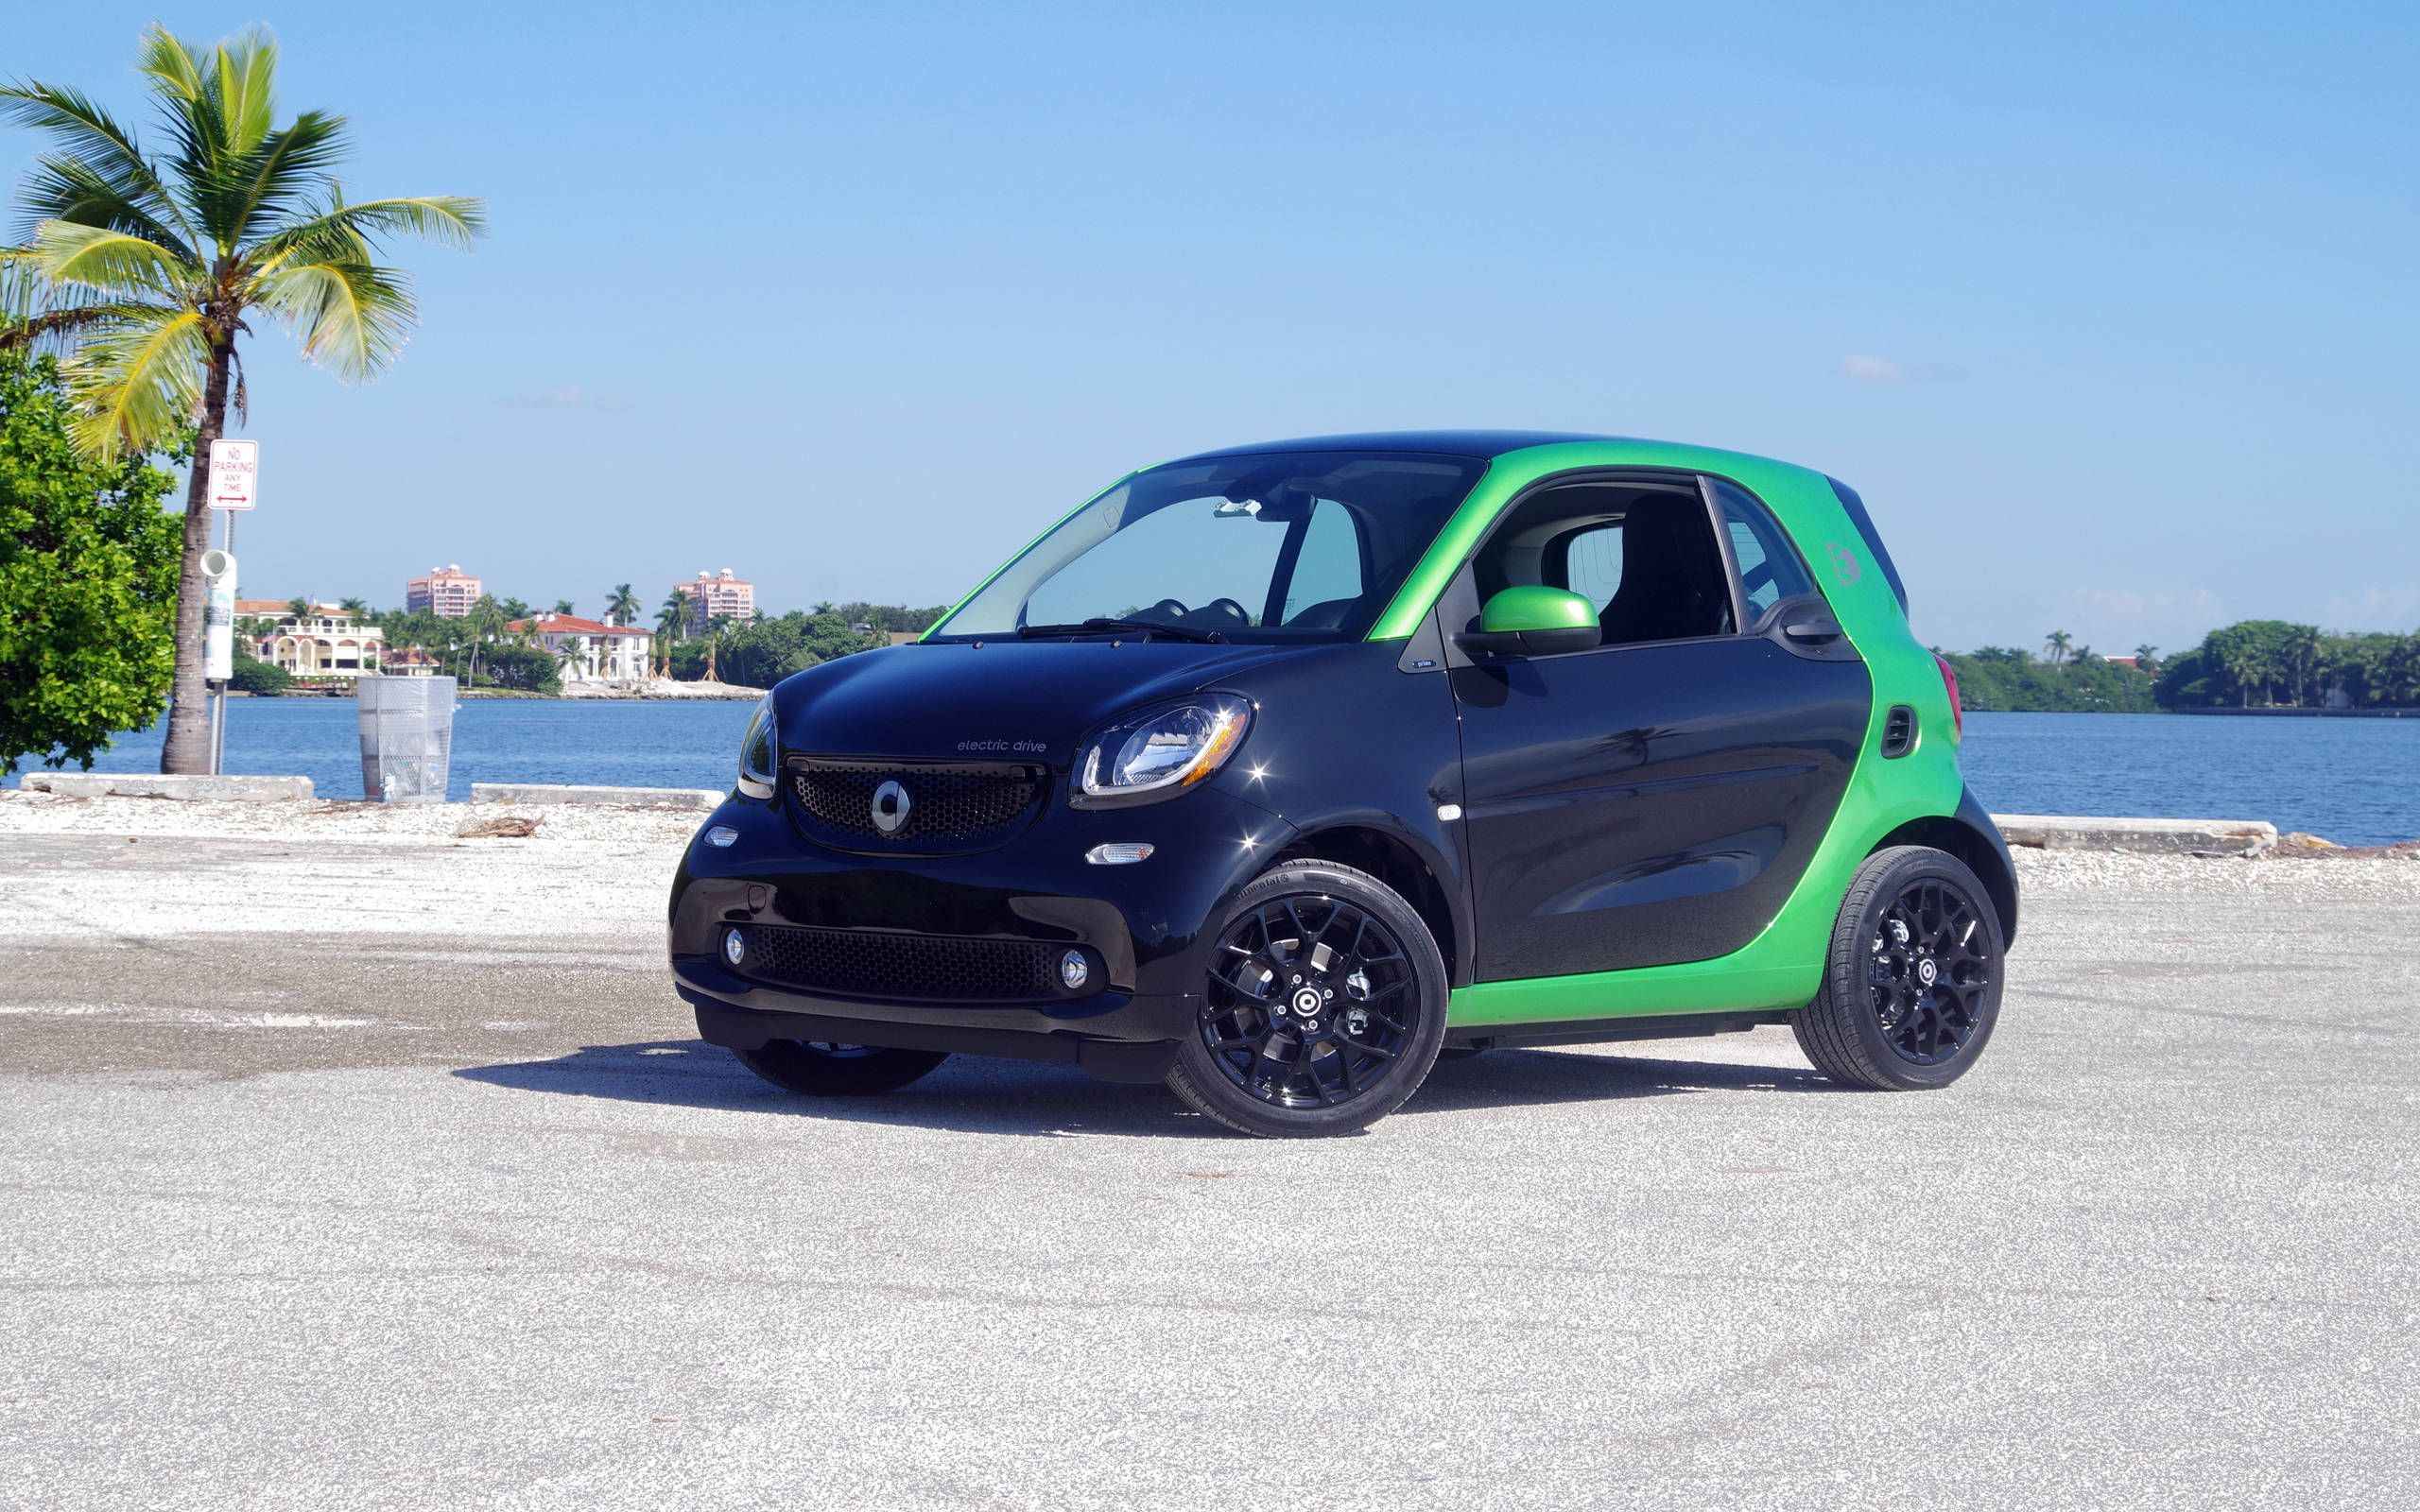 Gallery: 2017 Smart Fortwo Electric Drive